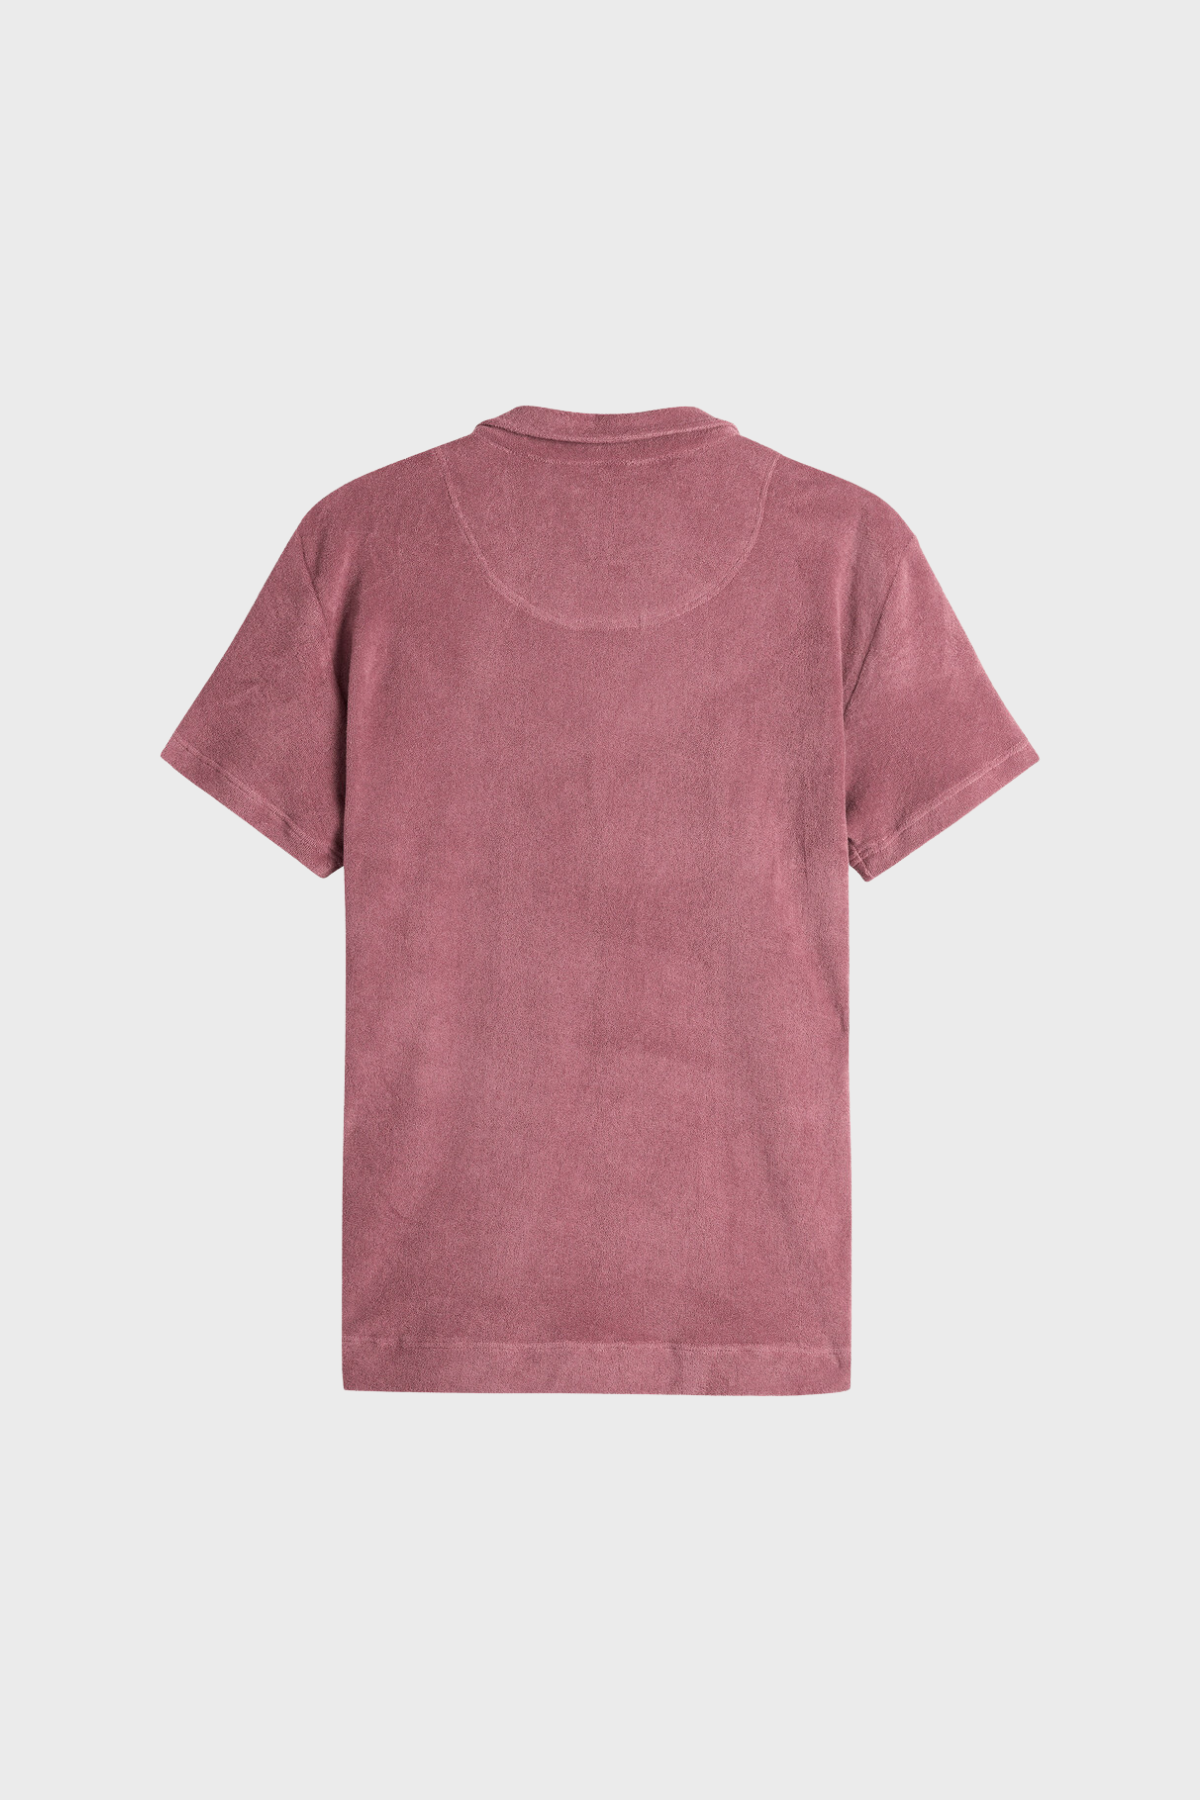 Polo Terry Shirt in Dusty Plum